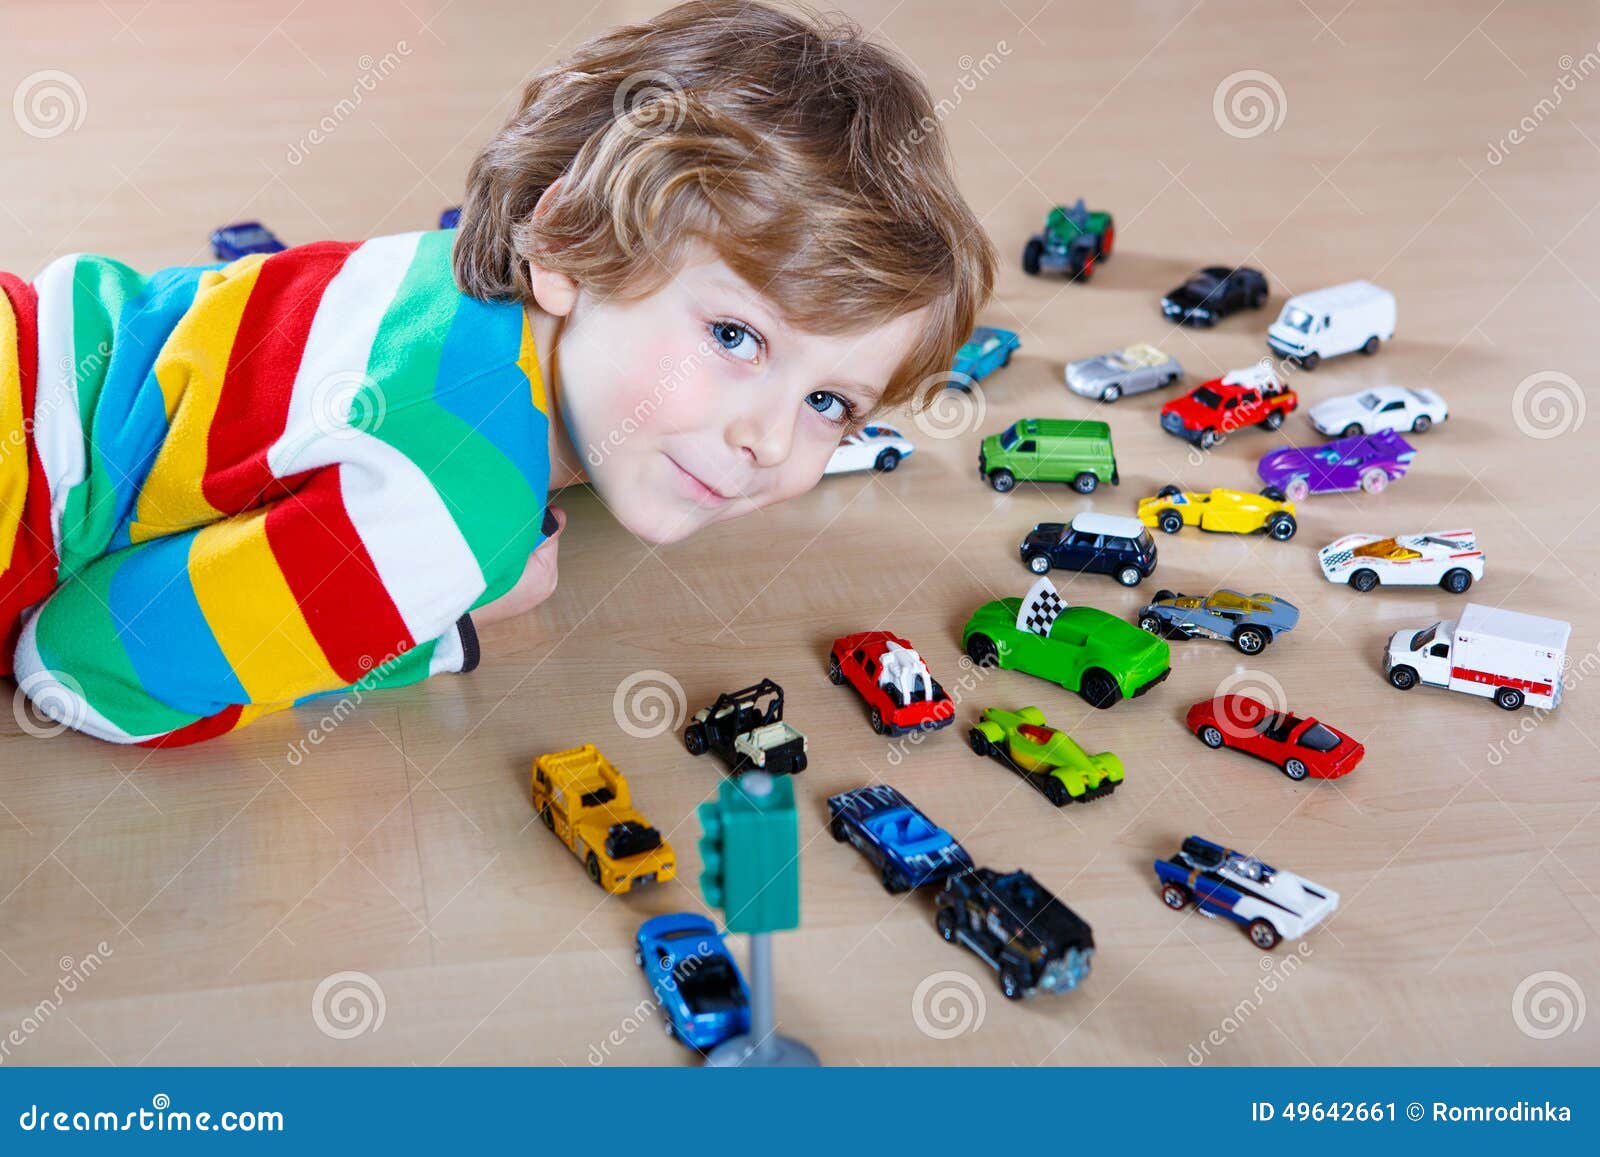 Image result for lots of toy cars